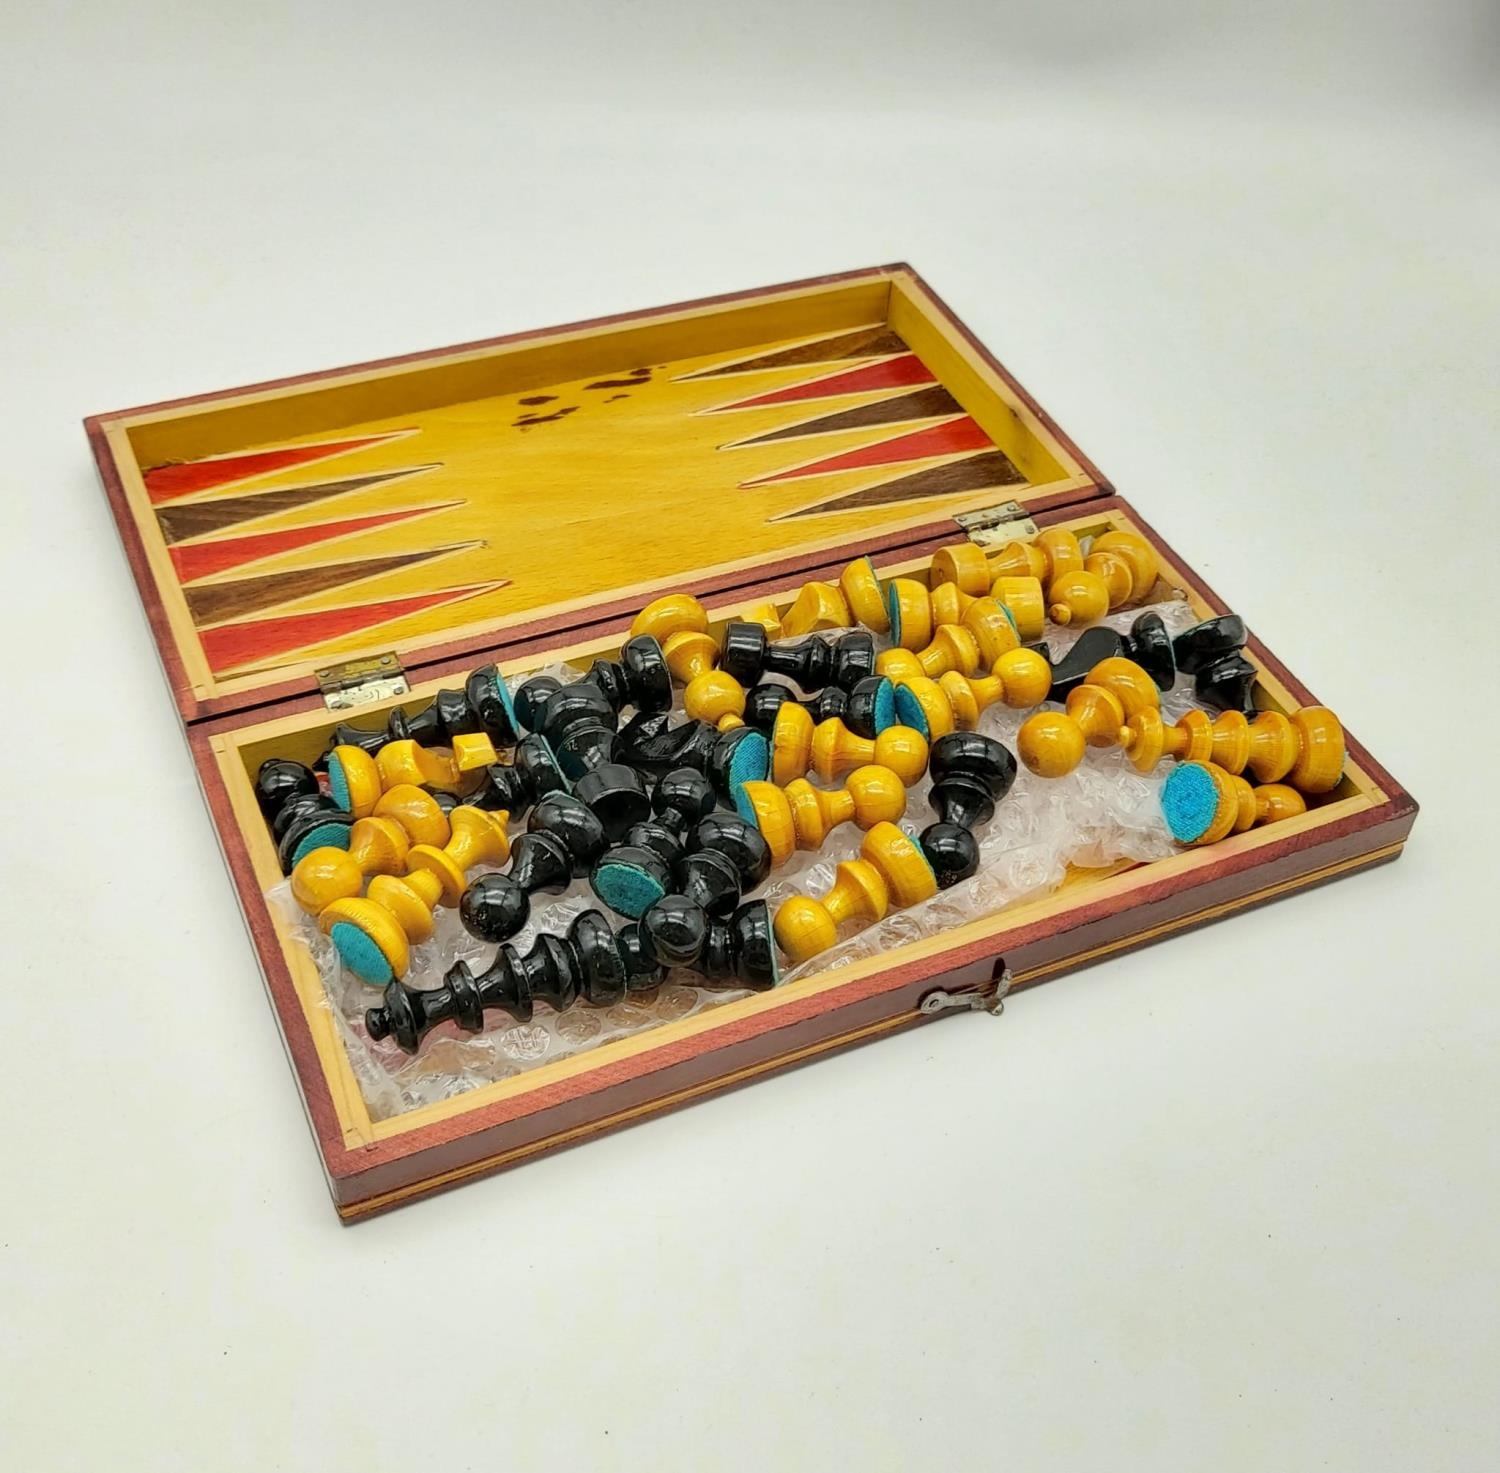 A Vintage Wooden Chess Set with Folding Board. Backgammon board on interior. 26 x 26cm.